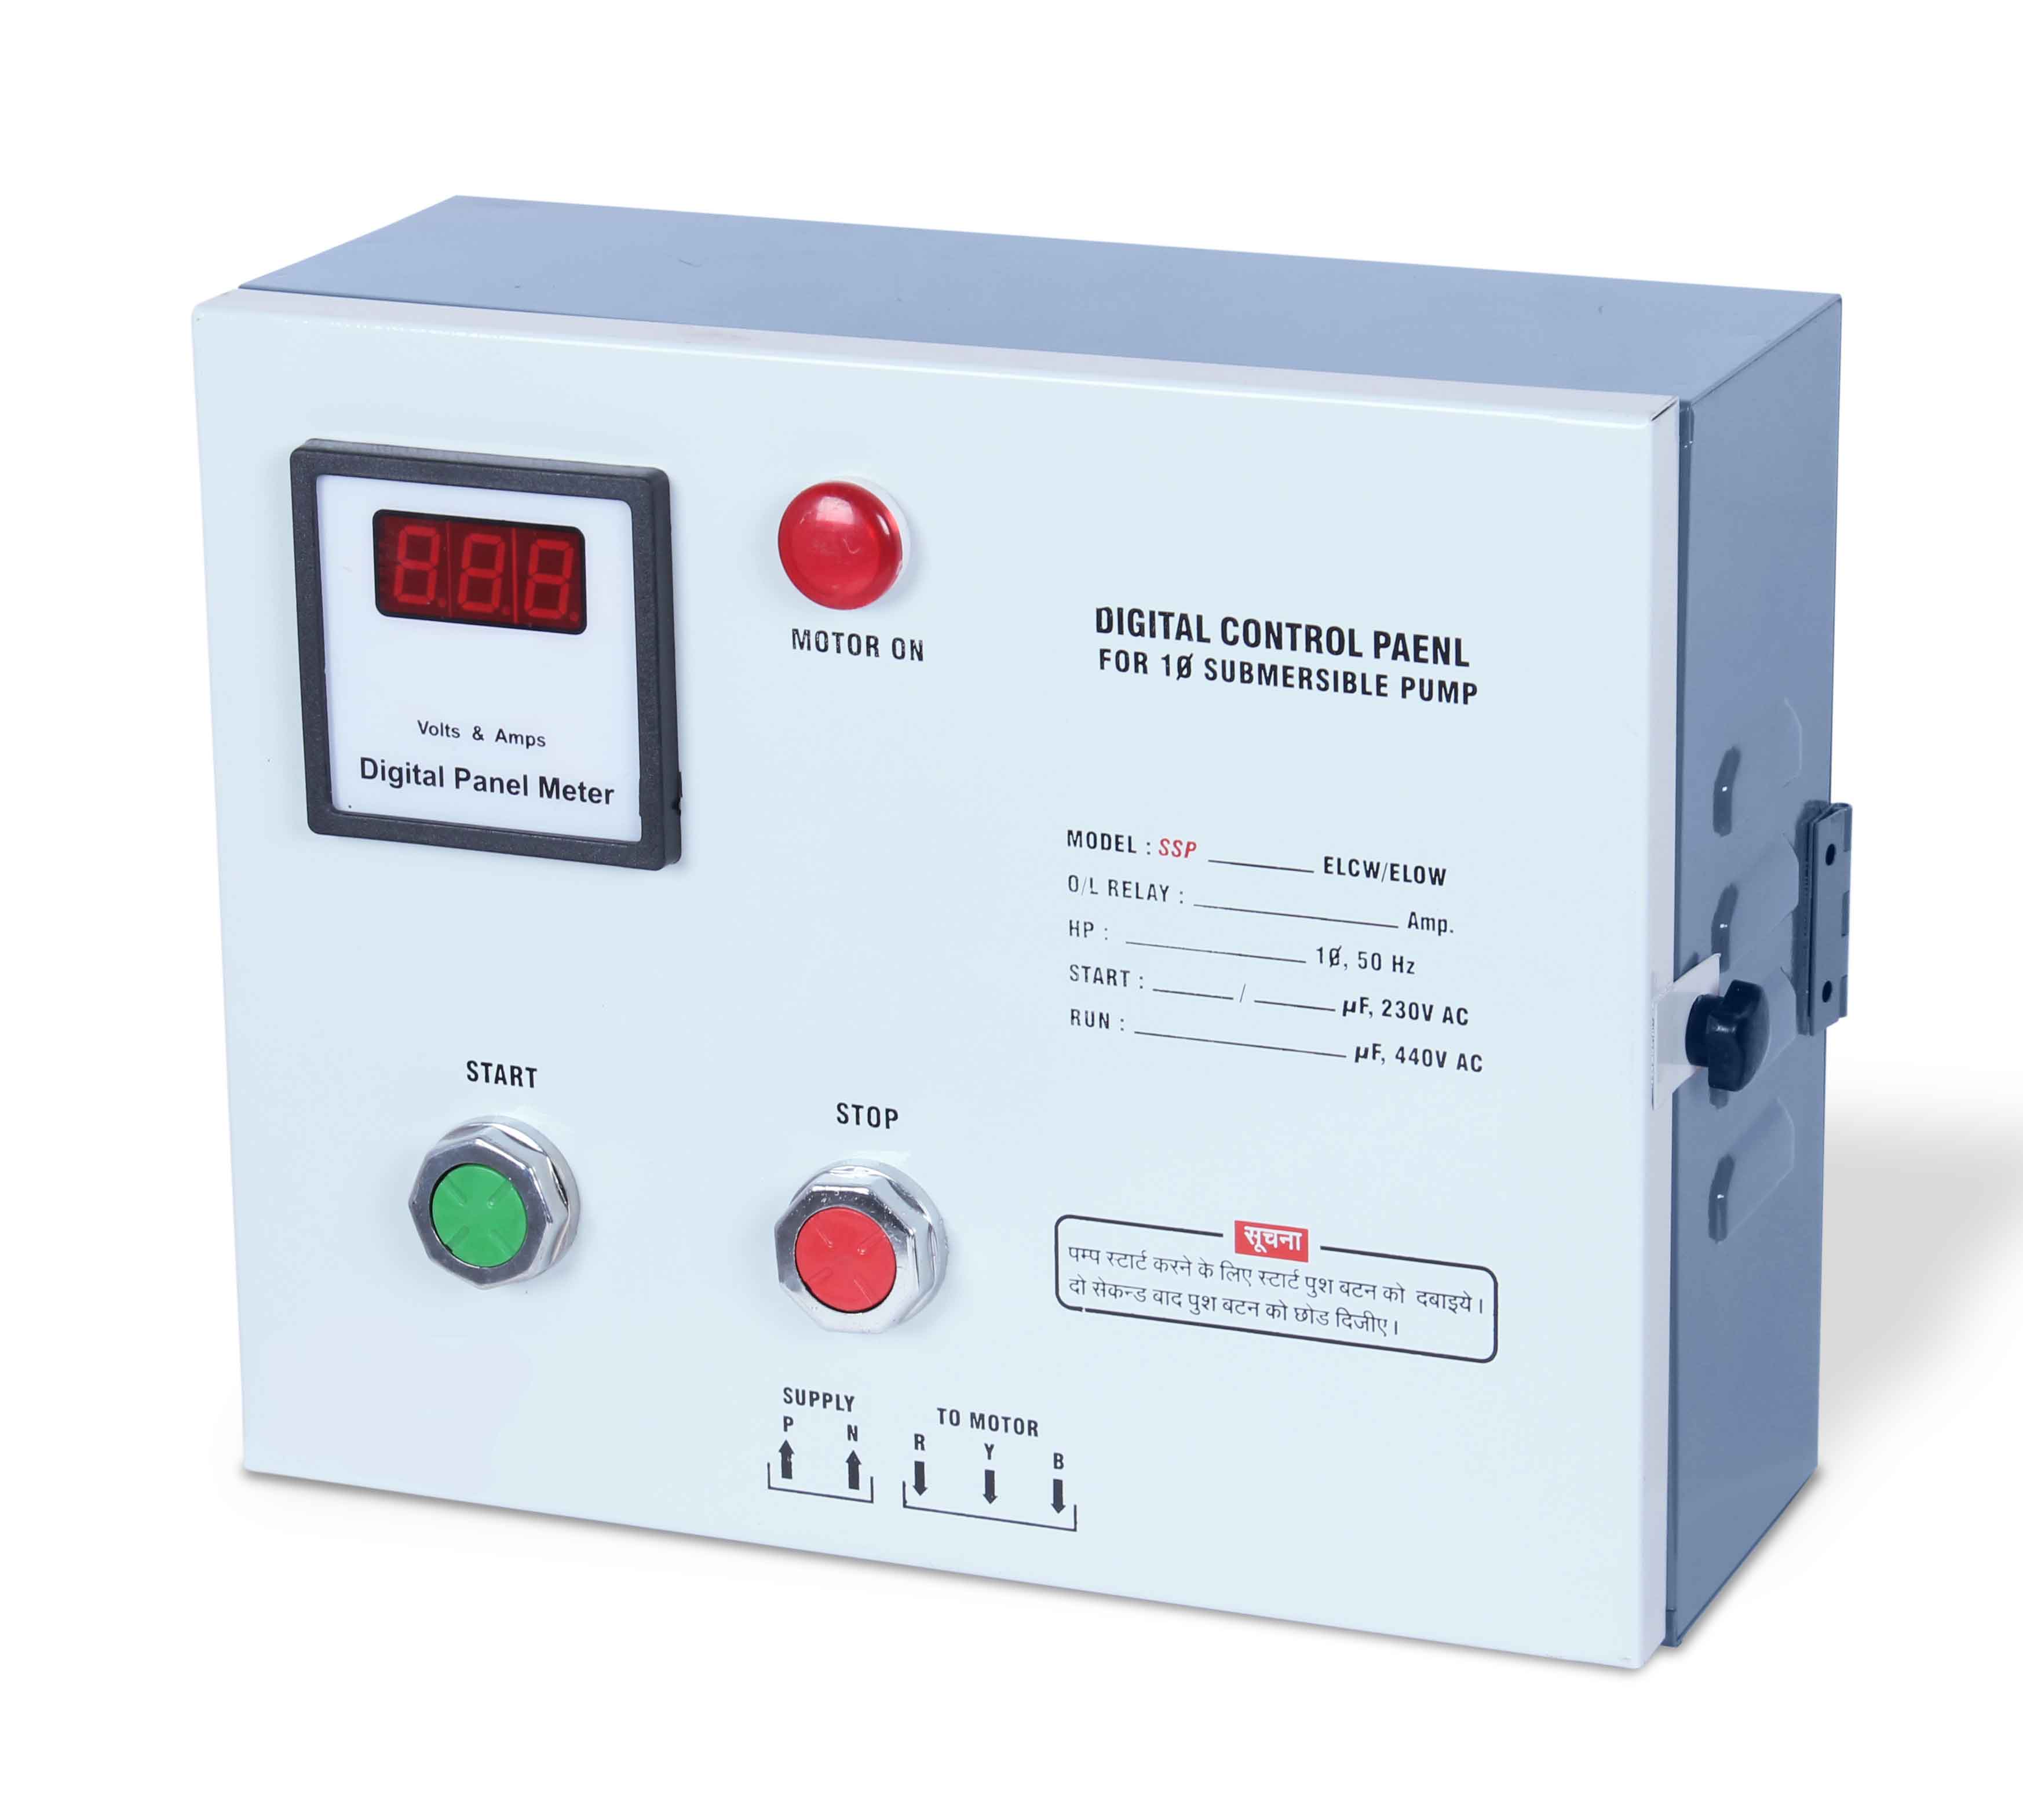 ELCW DIGI Single phase digital motor starter suitable for 2 HP submersible motor with overload protections by bi metallic relay